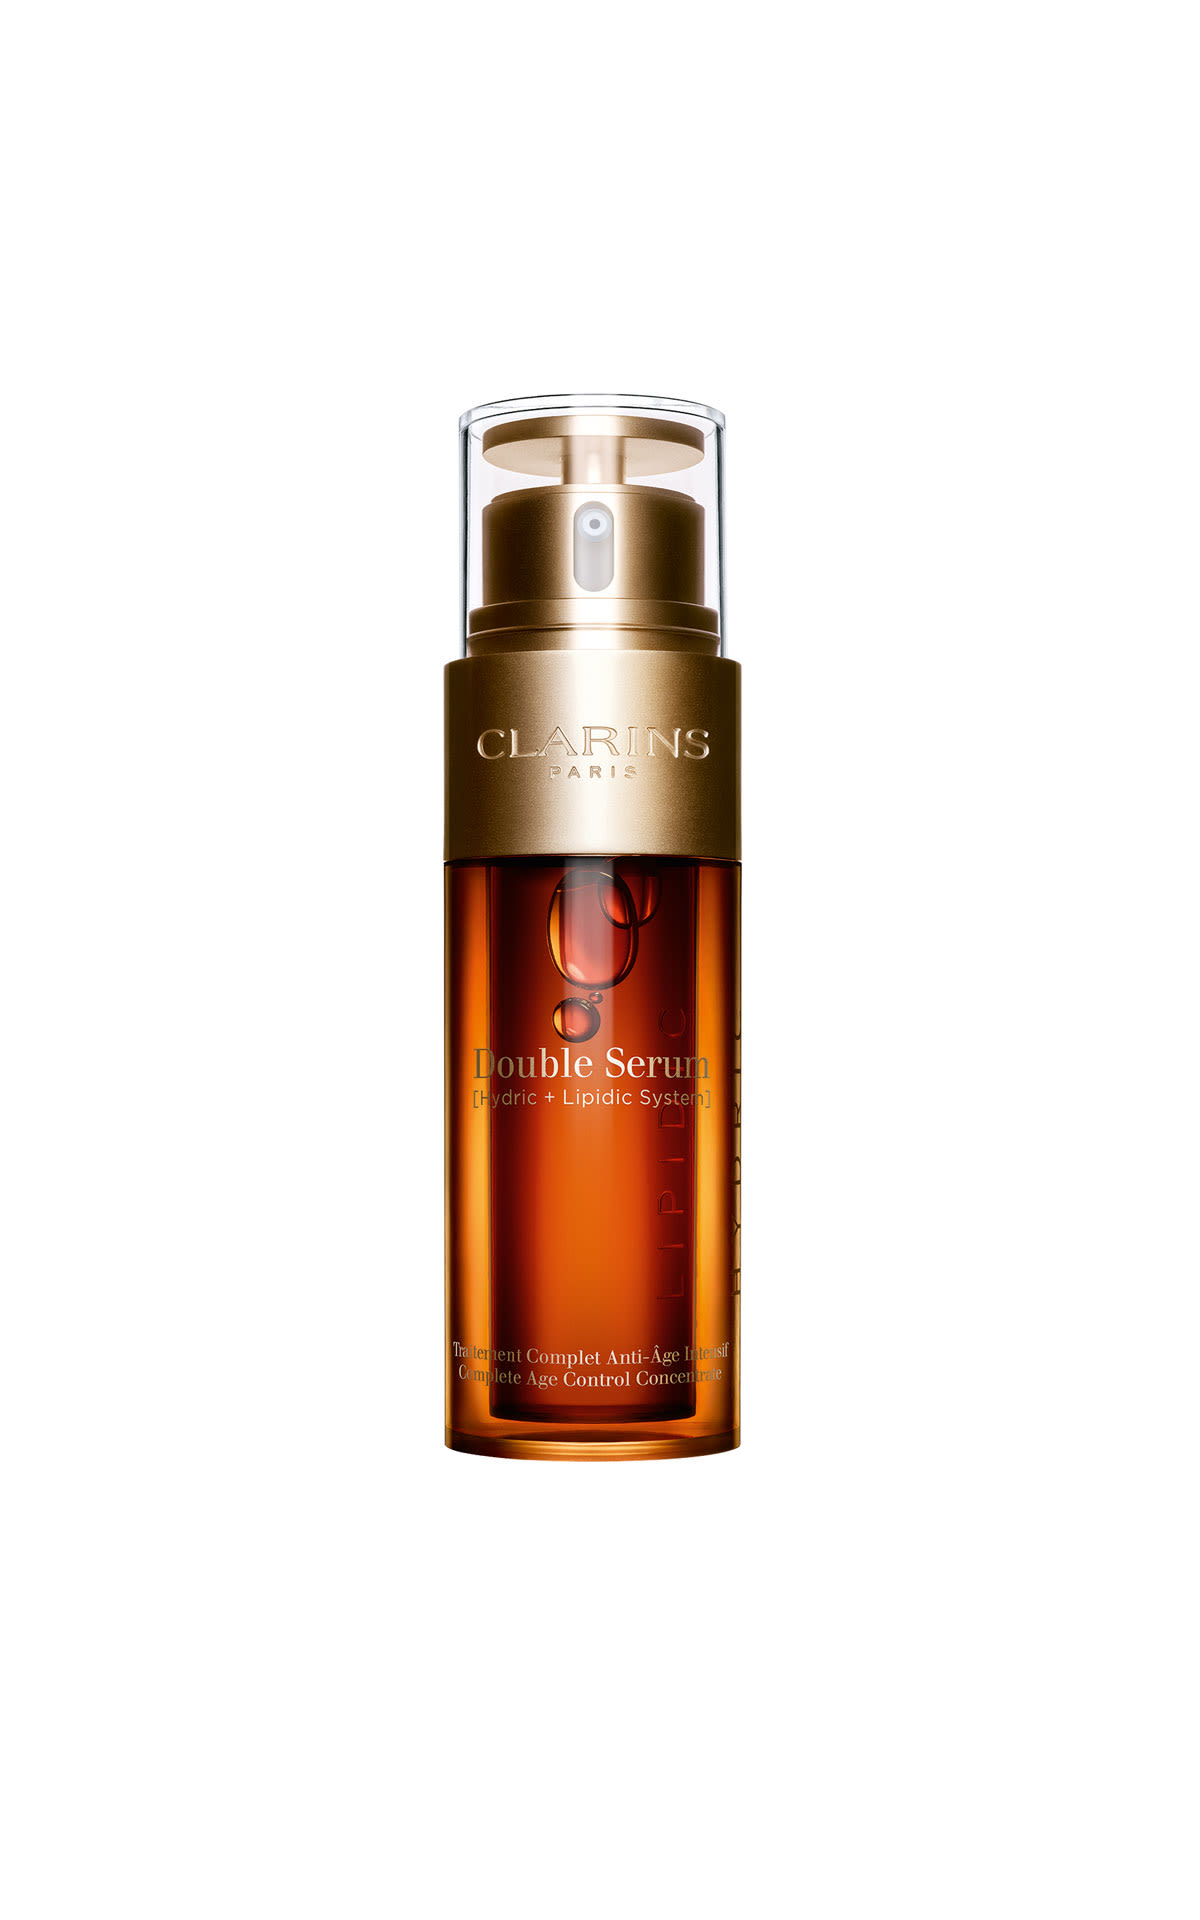 Clarins Double serum deluxe edition from Bicester Village